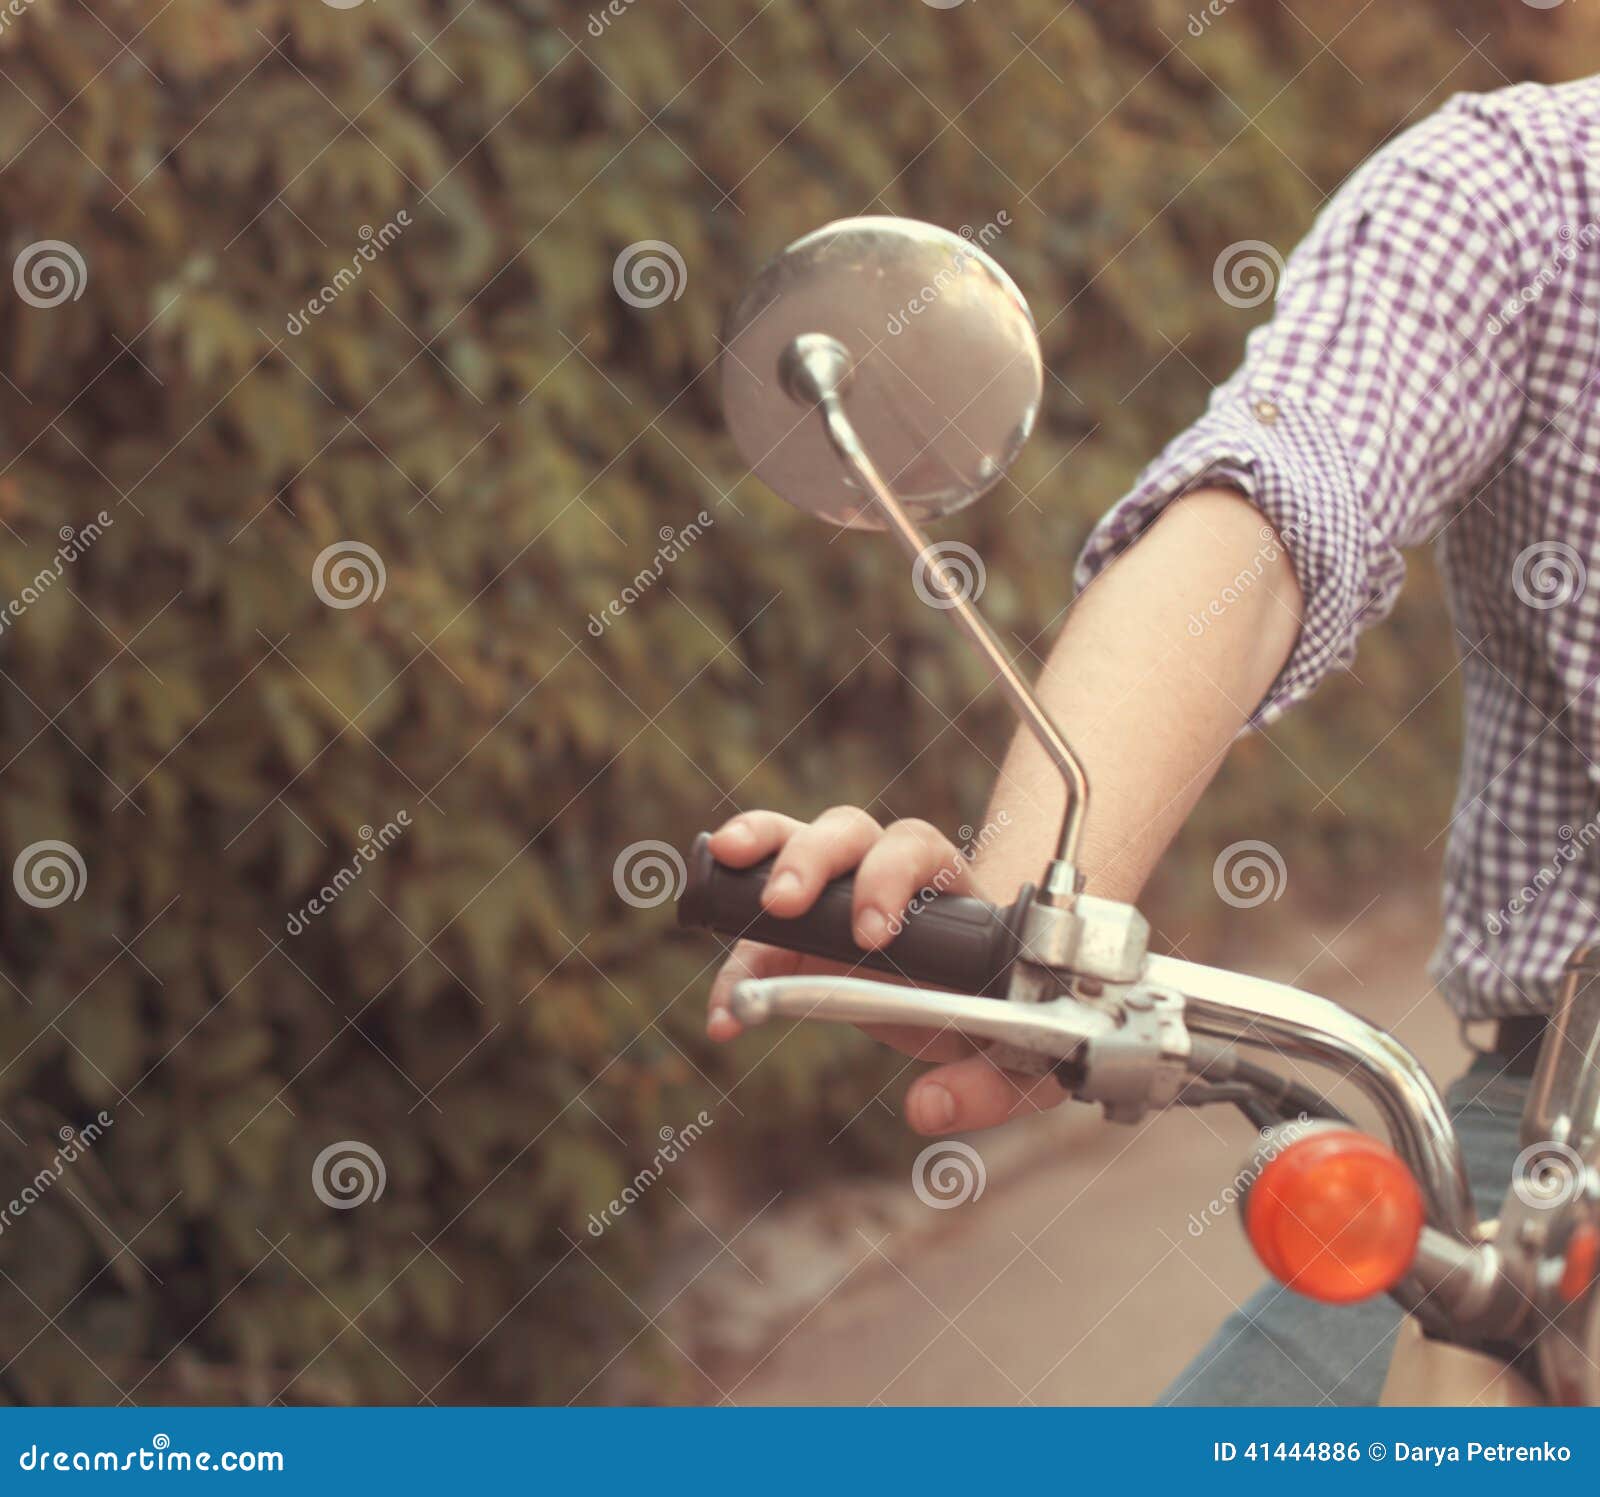 Young Man Riding Old Retro Scooter Stock Photo - Image of rider, motor